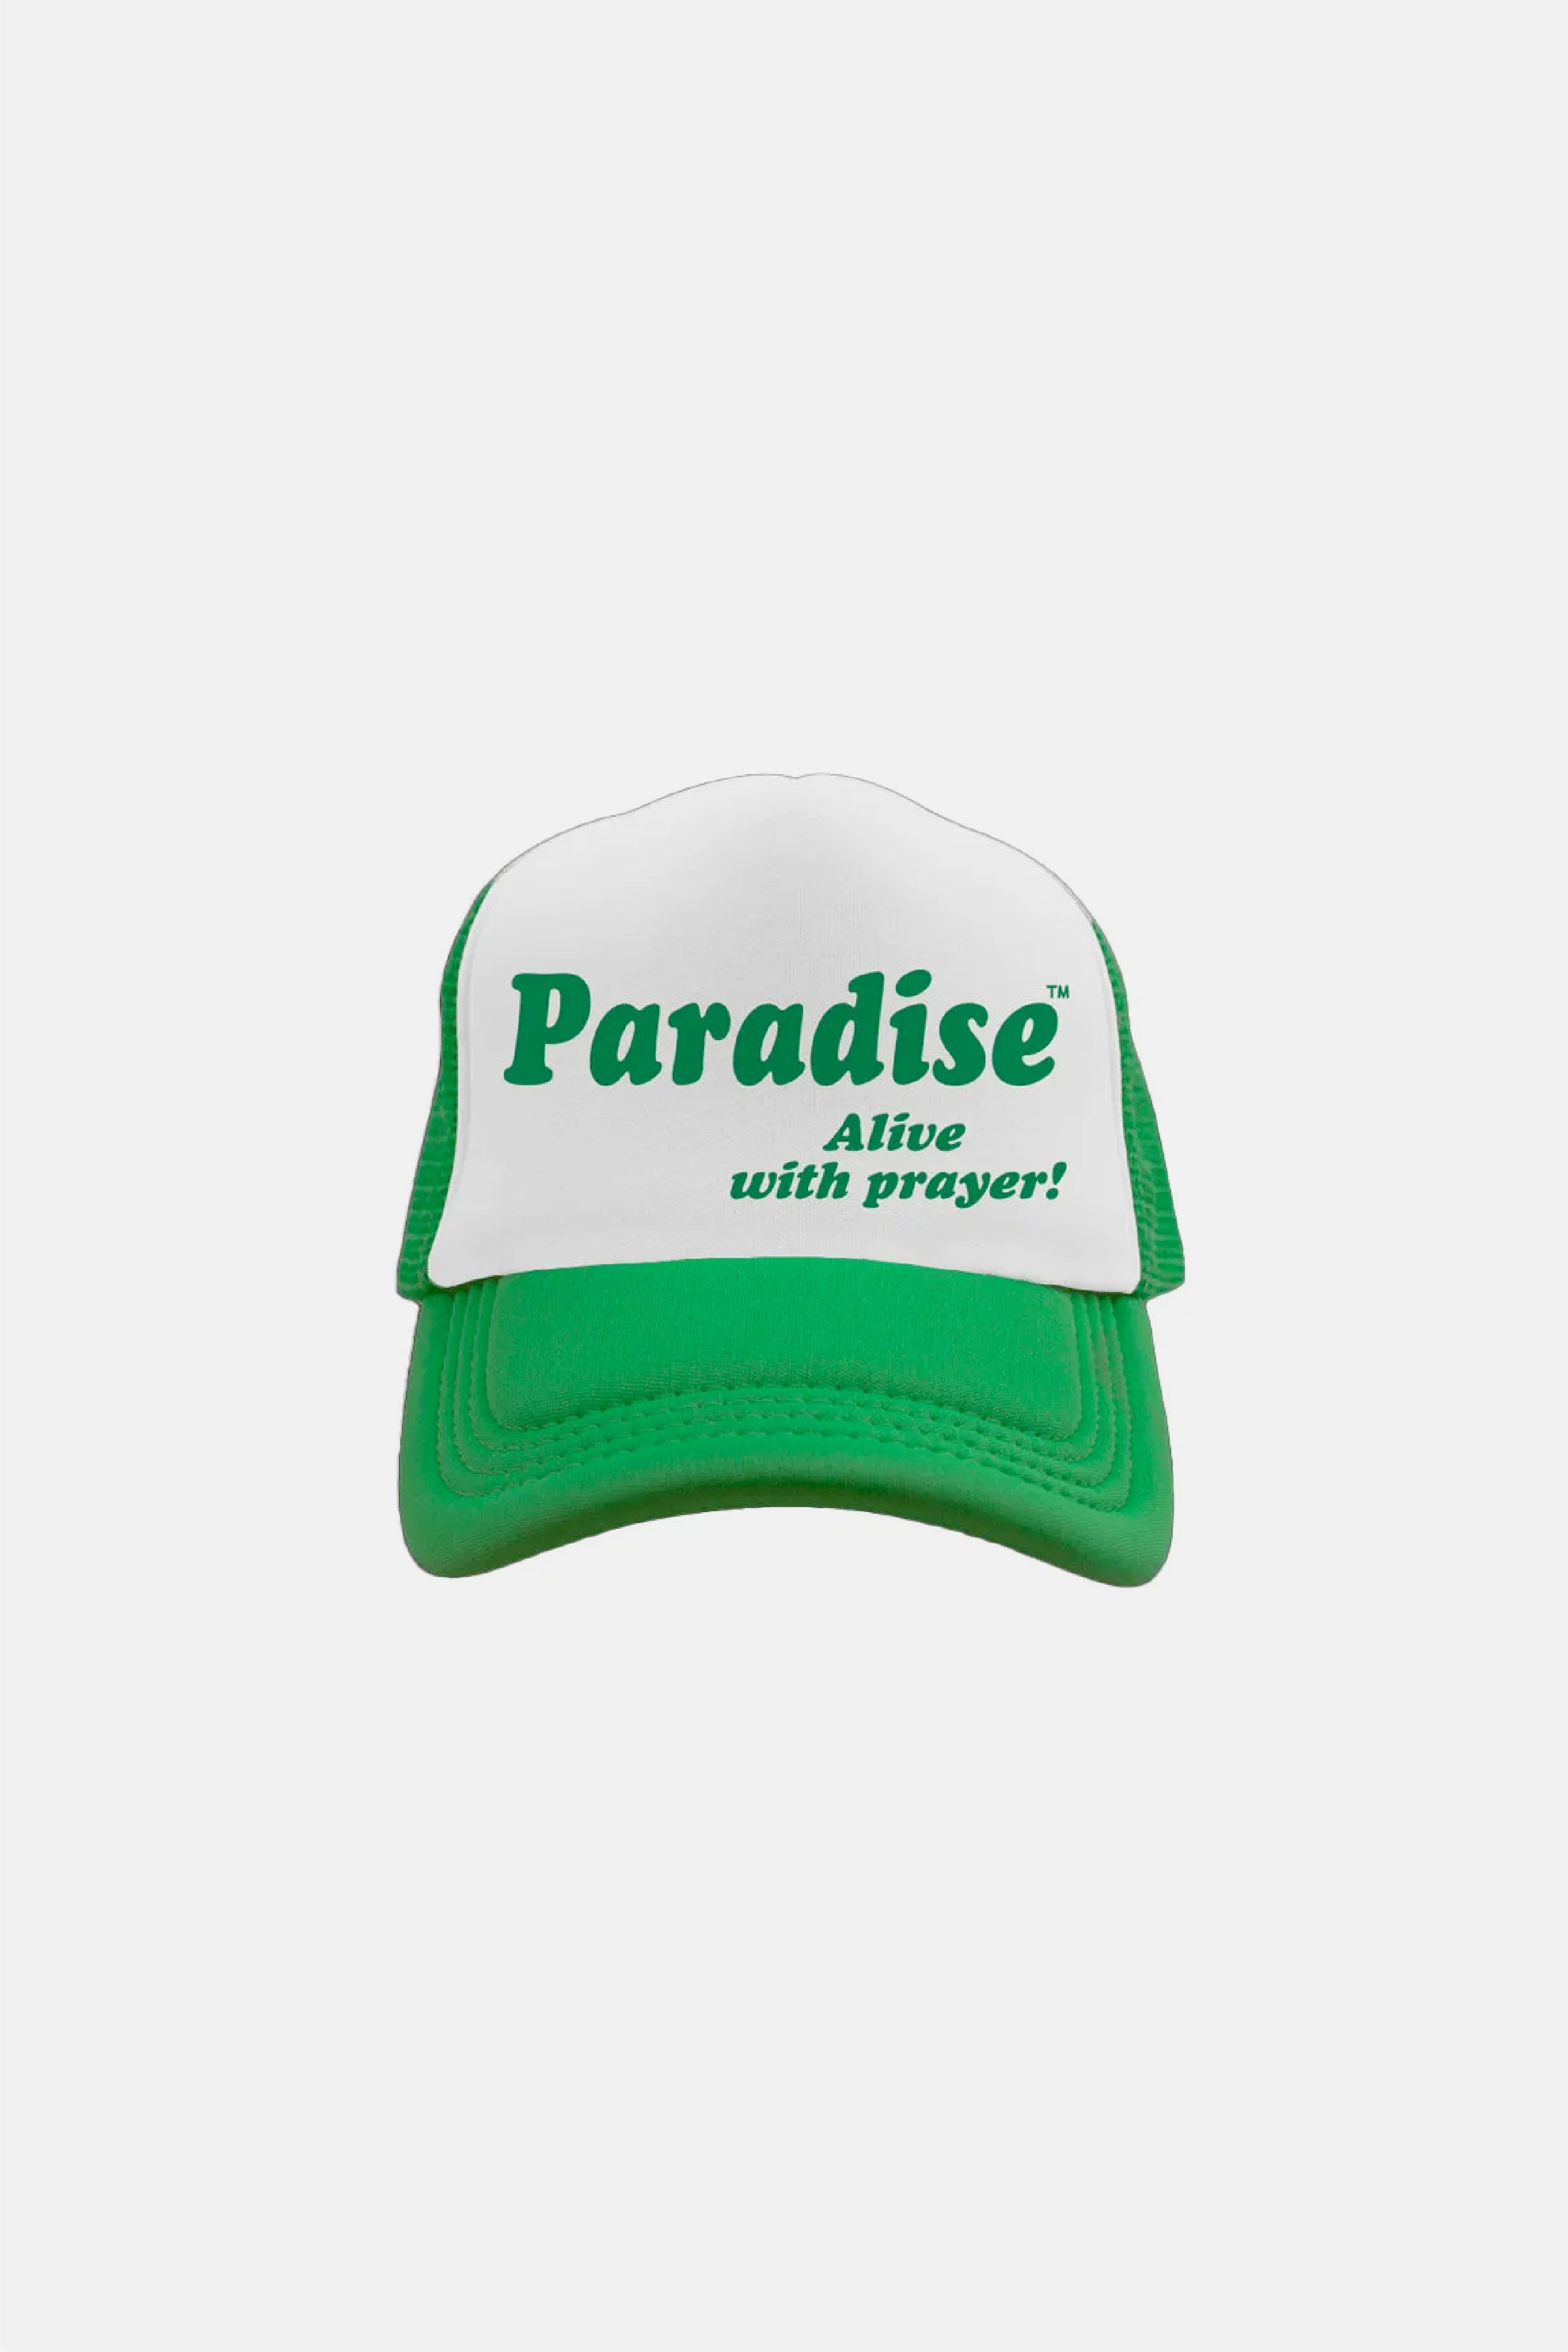 Selectshop FRAME - PARADIS3 Alive With Prayer Trucker Hat All-Accessories Dubai